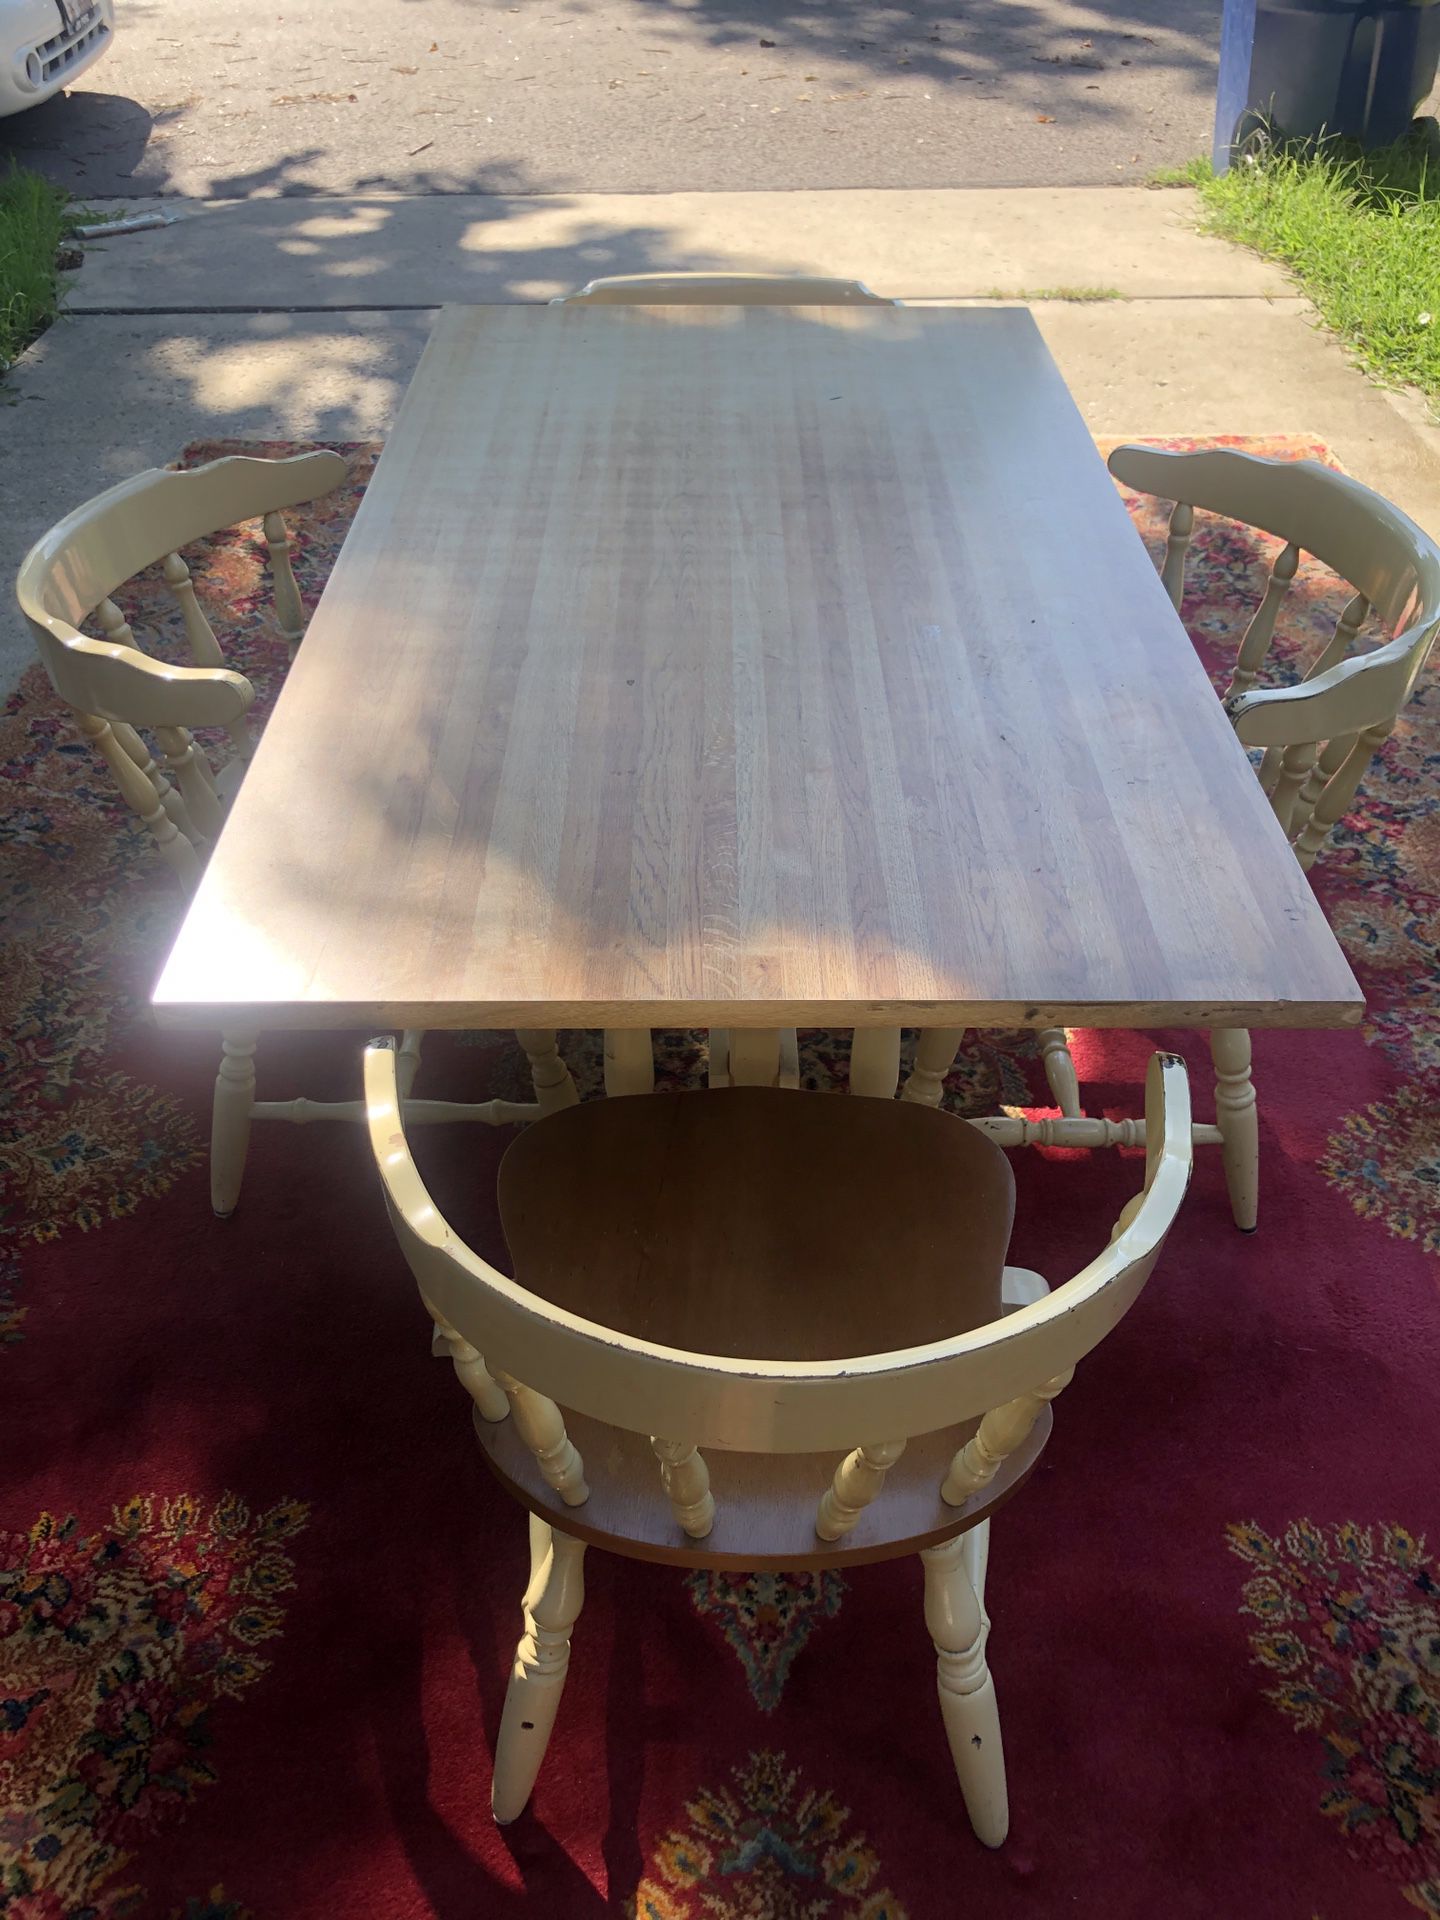 Farm house kitchen table with 4 chairs